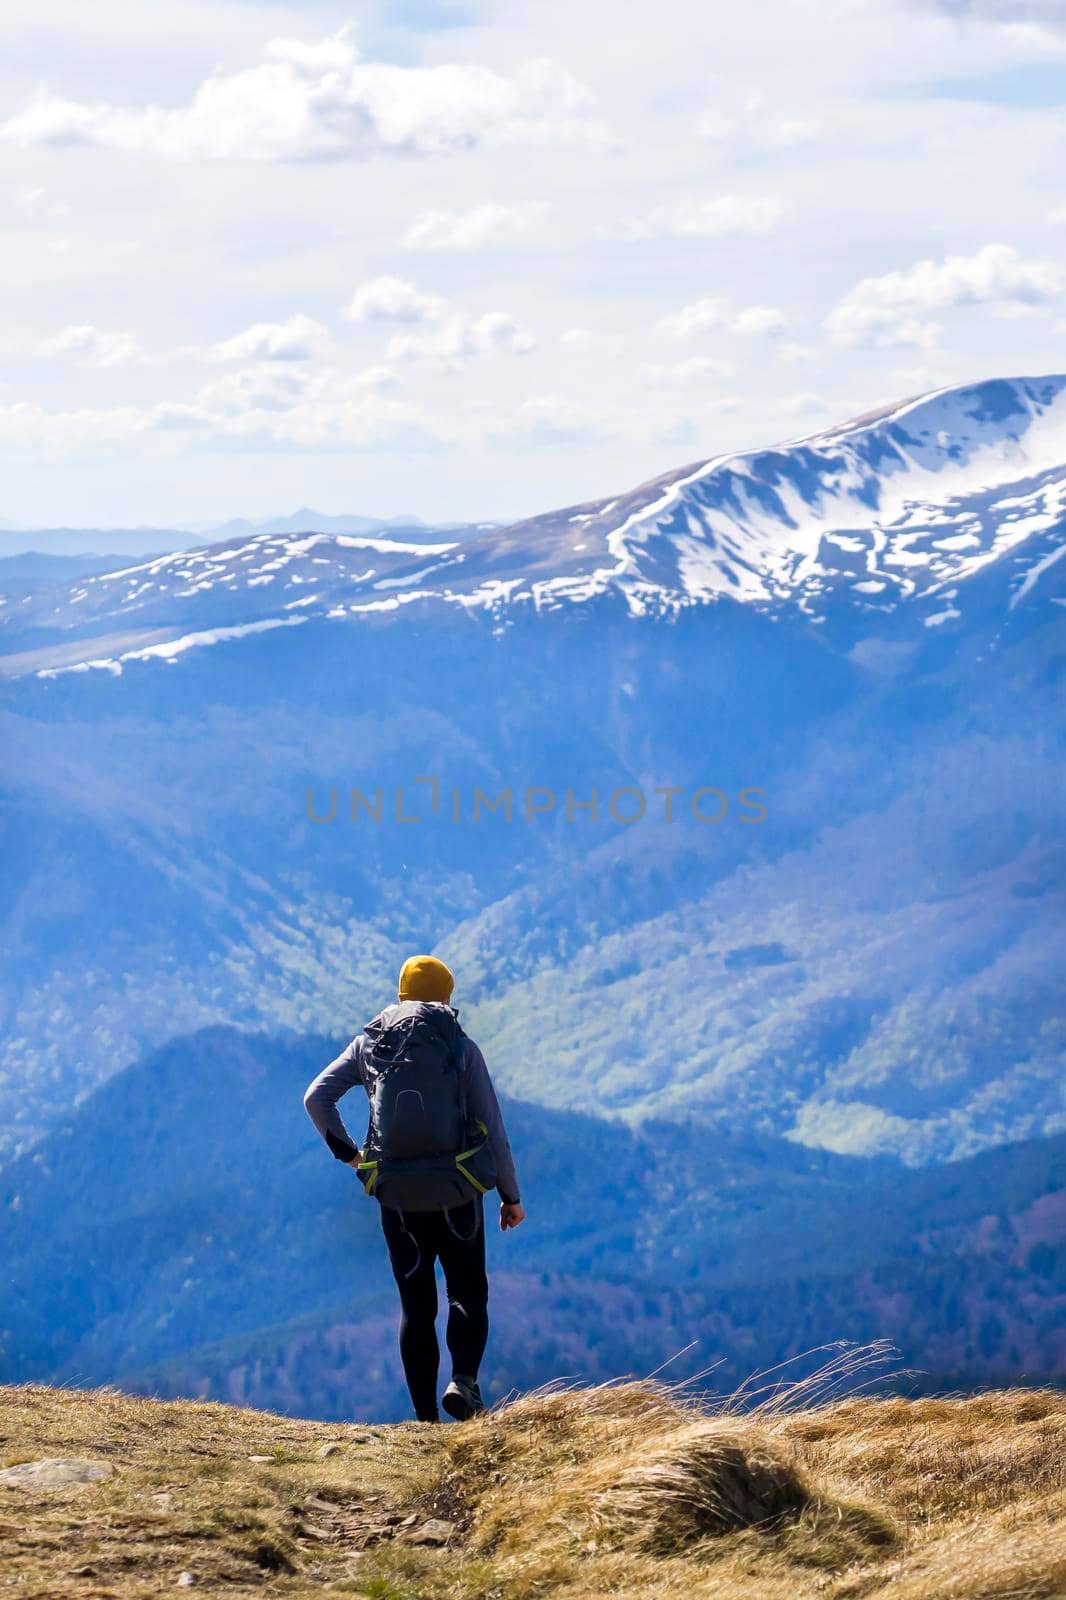 The traveler looks at the stunning view of the snow-capped mountains at sunset. Young man with a backpack and tourist equipment is hiking in the national park in winter, engaged in extreme sports.